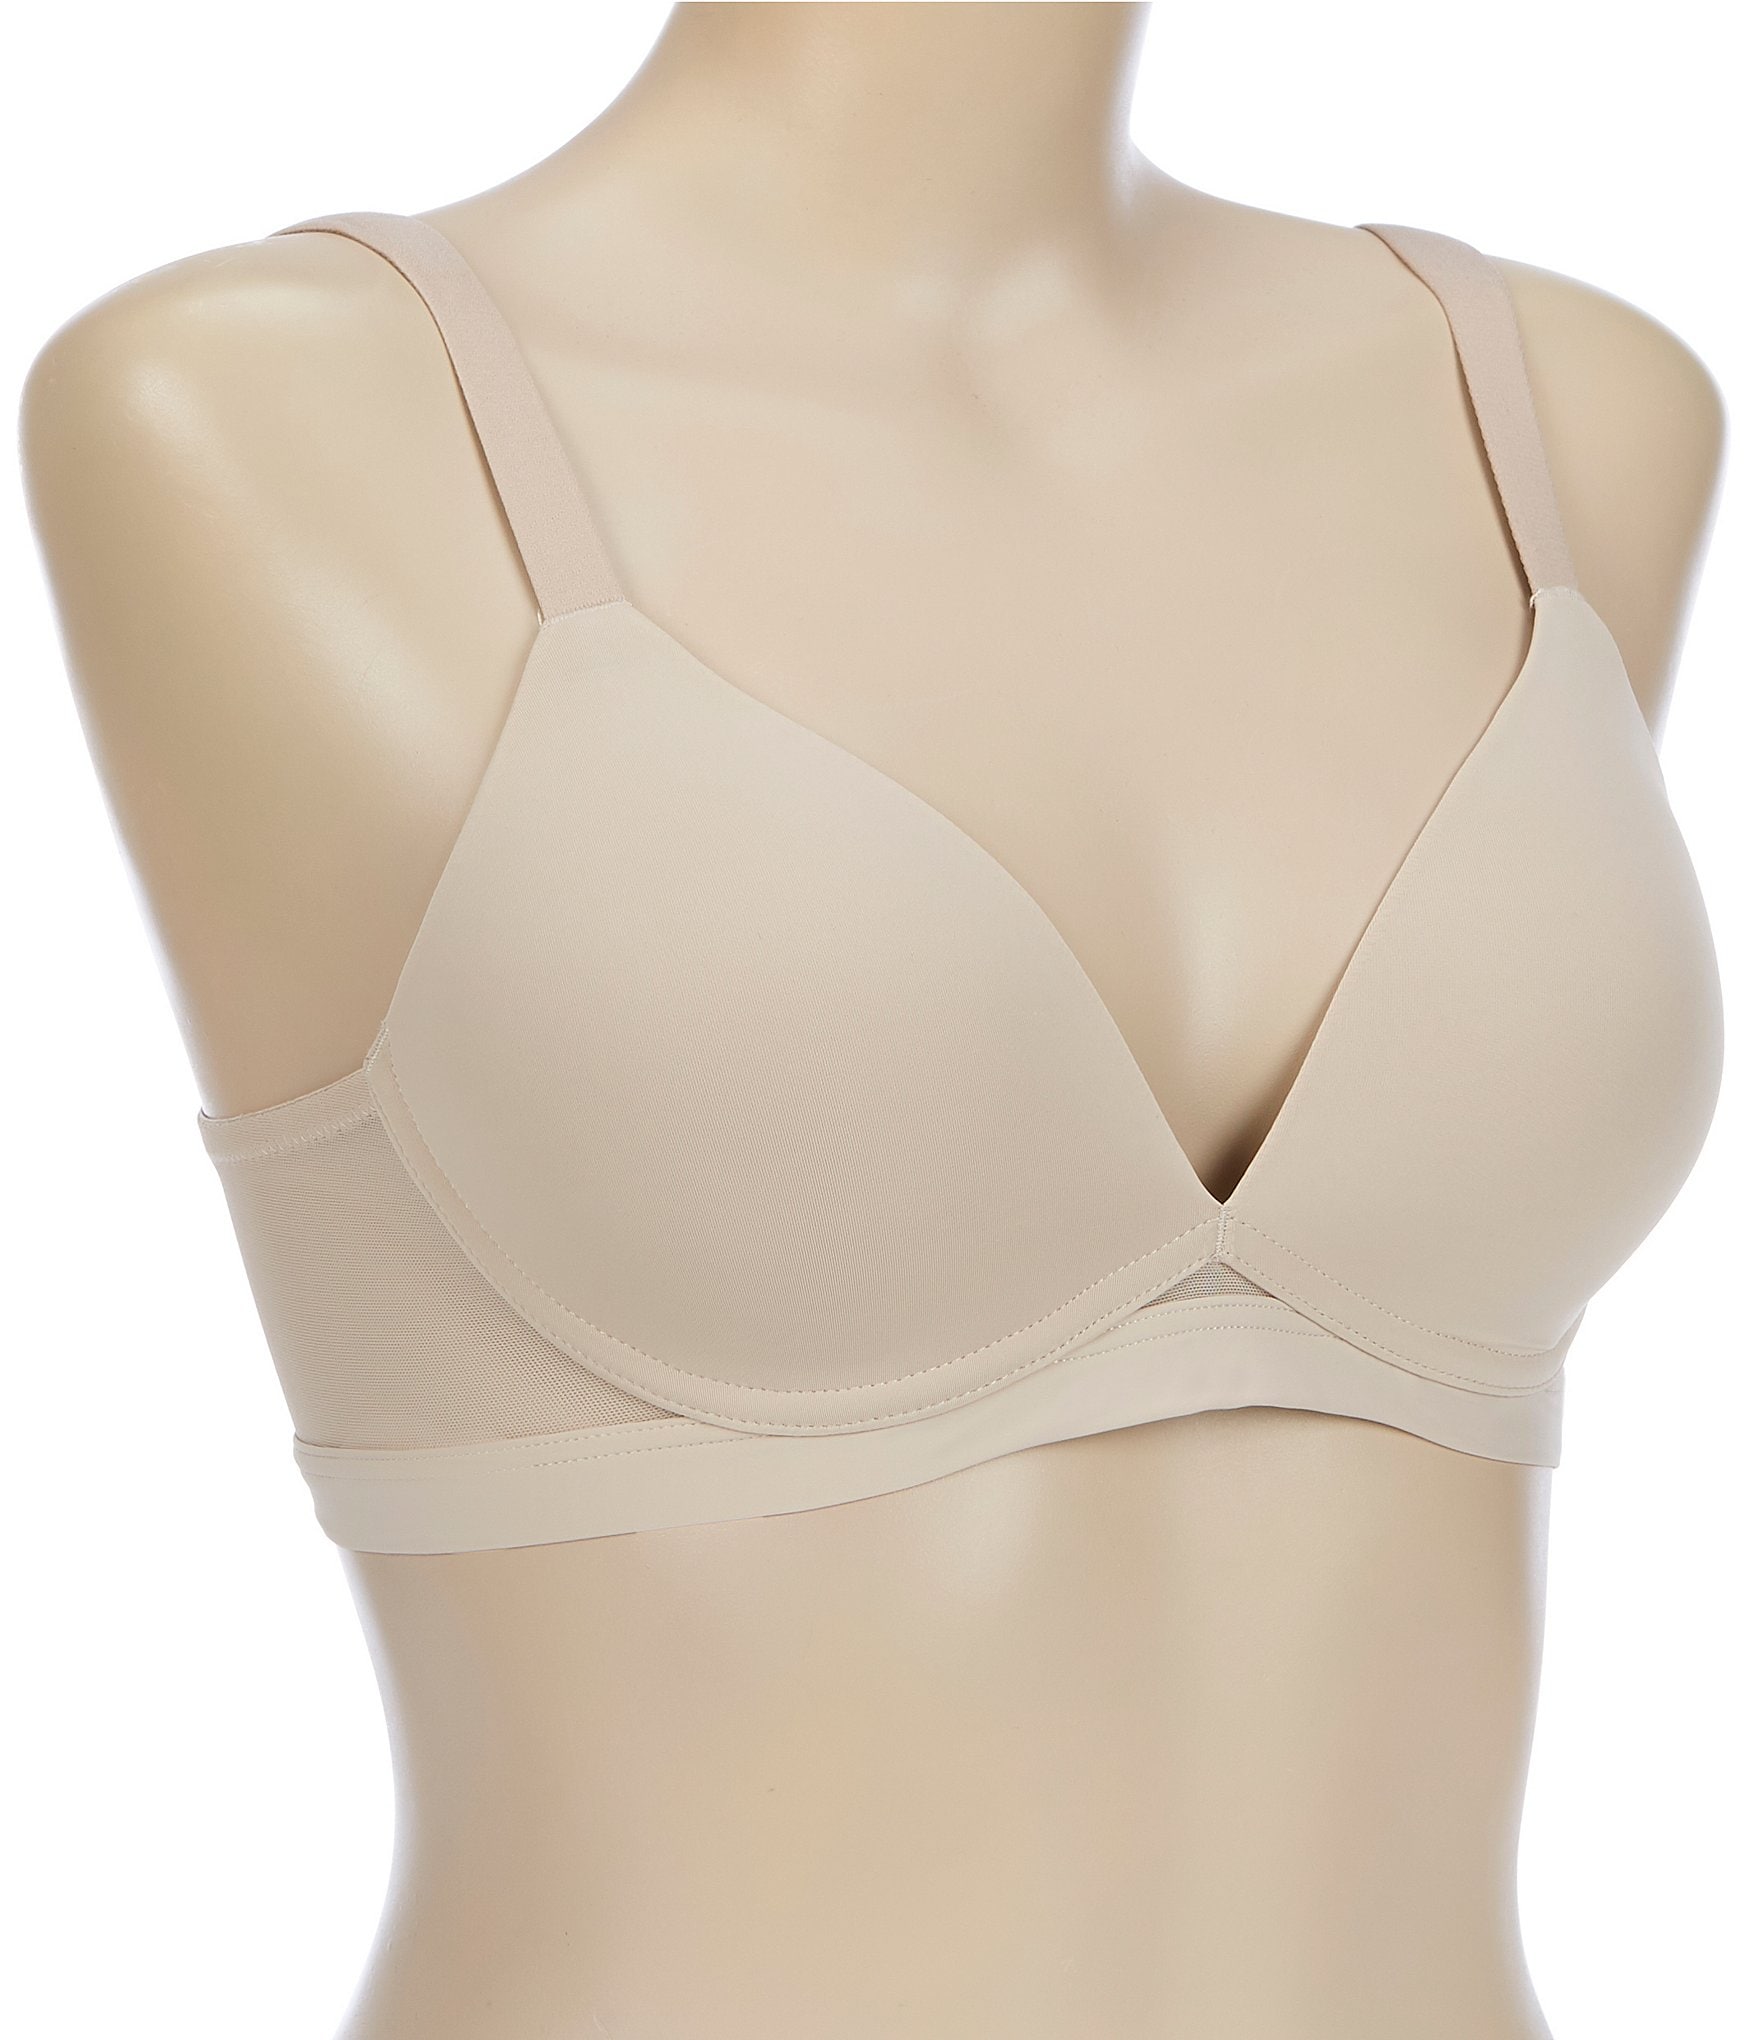 I want to work as a bra fitter at like Nordstroms or Dillards, or